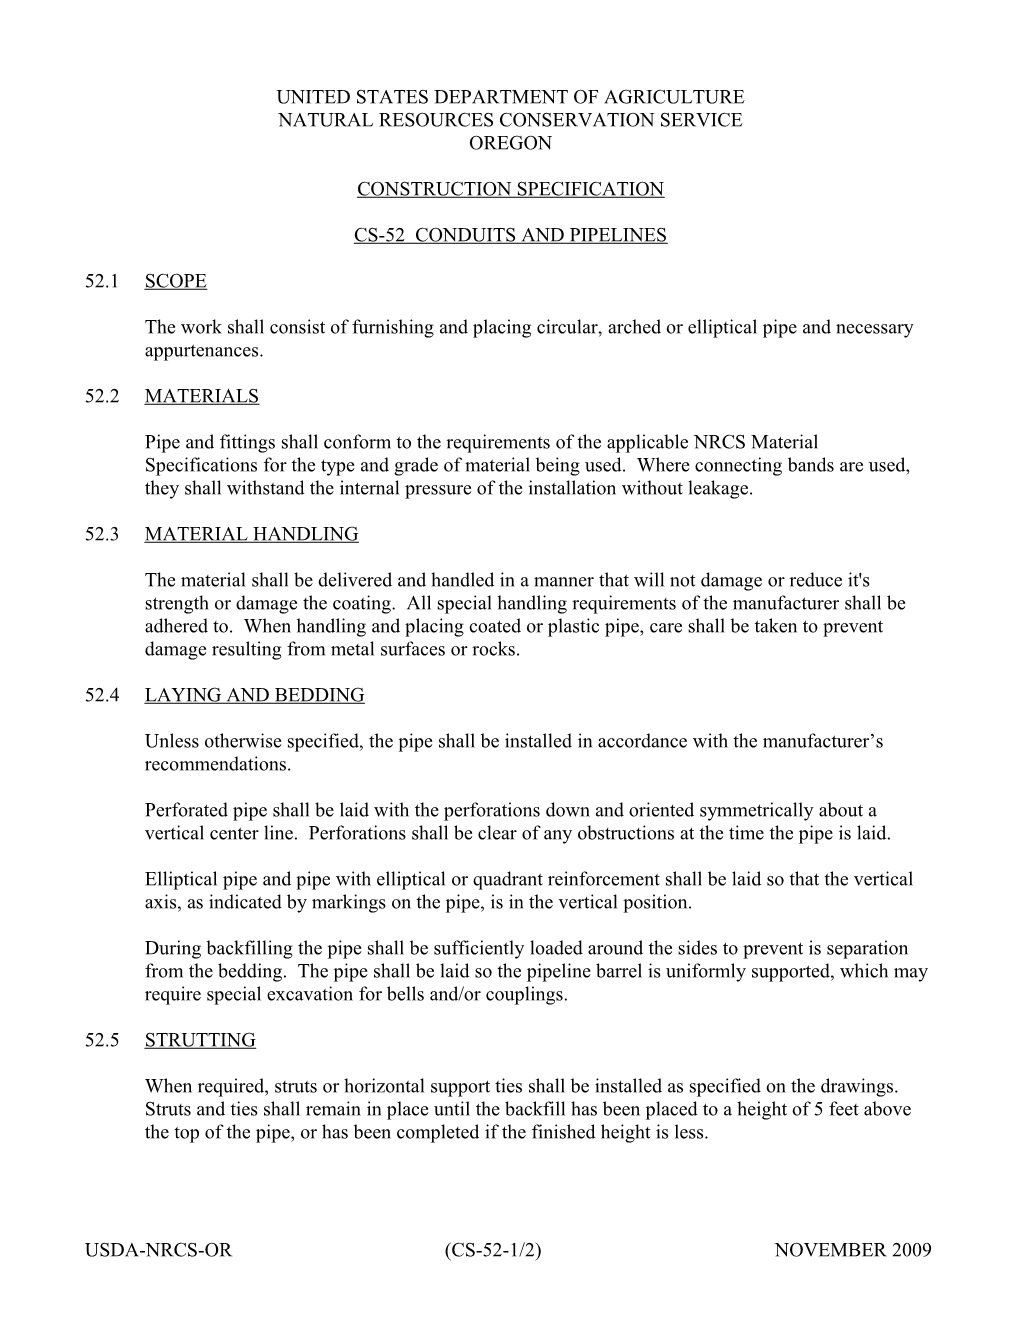 Instructions for Use of Washington Construction Specification (Cs-52)